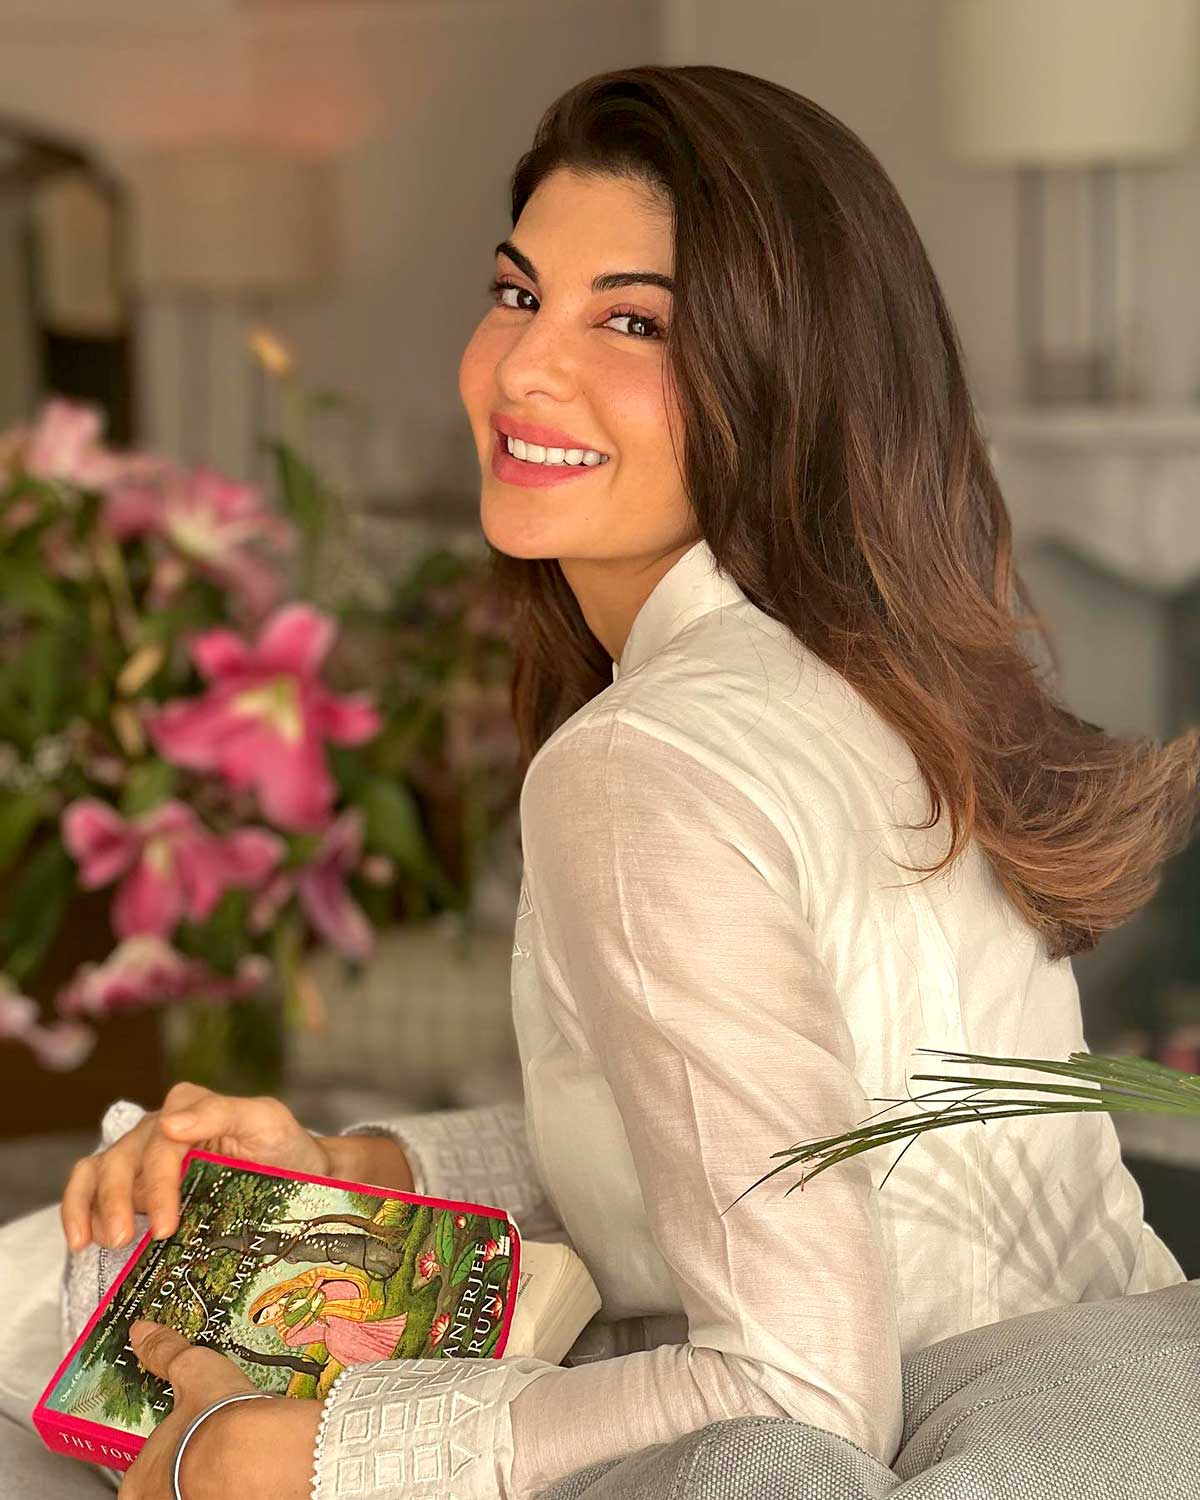 Jacqueline X Video - Jacqueline is BACK on social media - Rediff.com movies